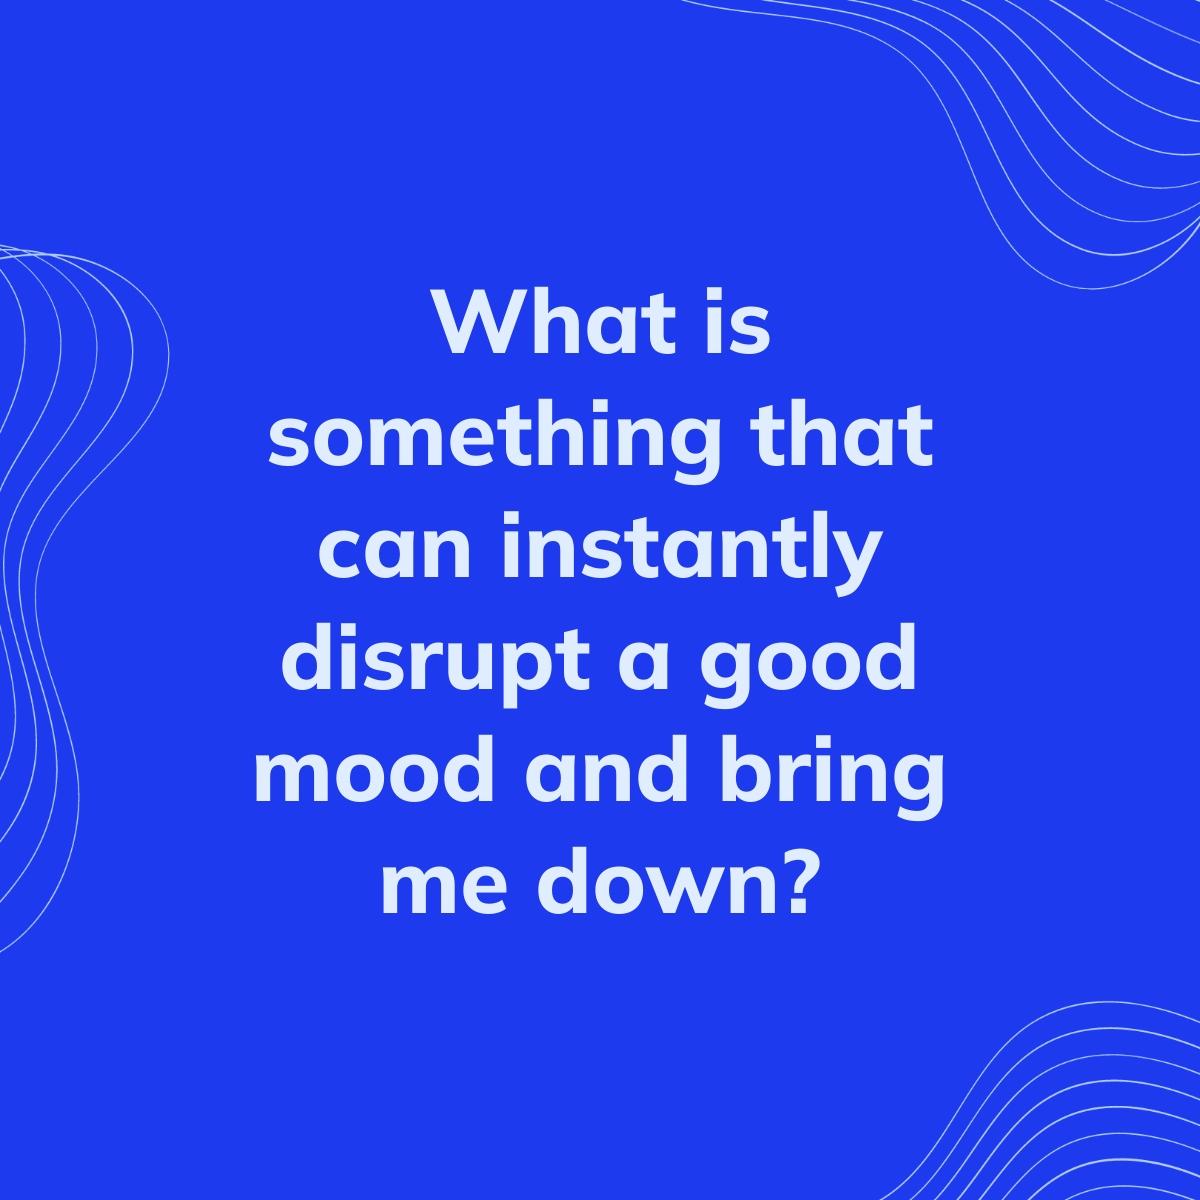 Journal Prompt: What is something that can instantly disrupt a good mood and bring me down?